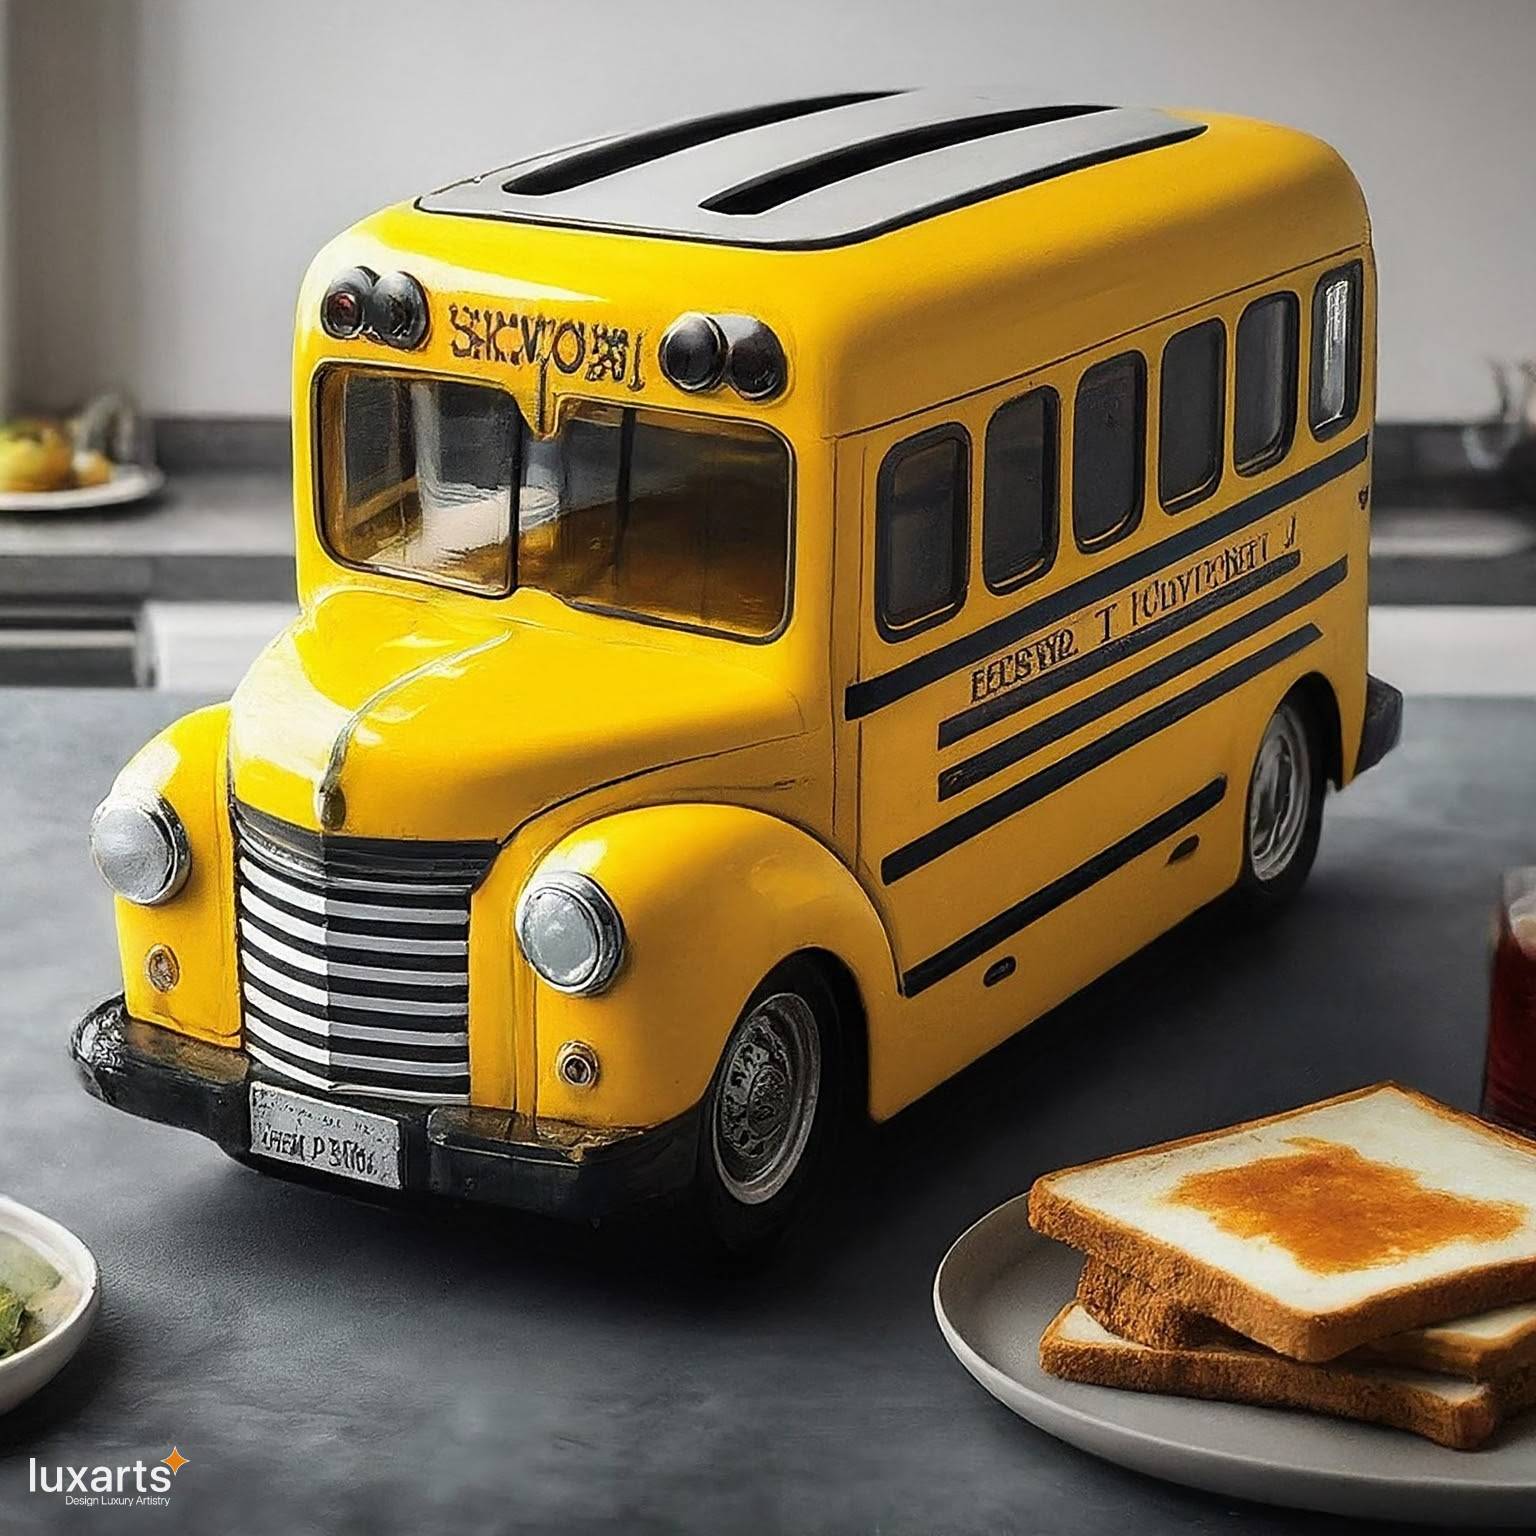 School Bus Shaped Toaster: Adding Fun to Breakfast Time luxarts school bus toaster 1